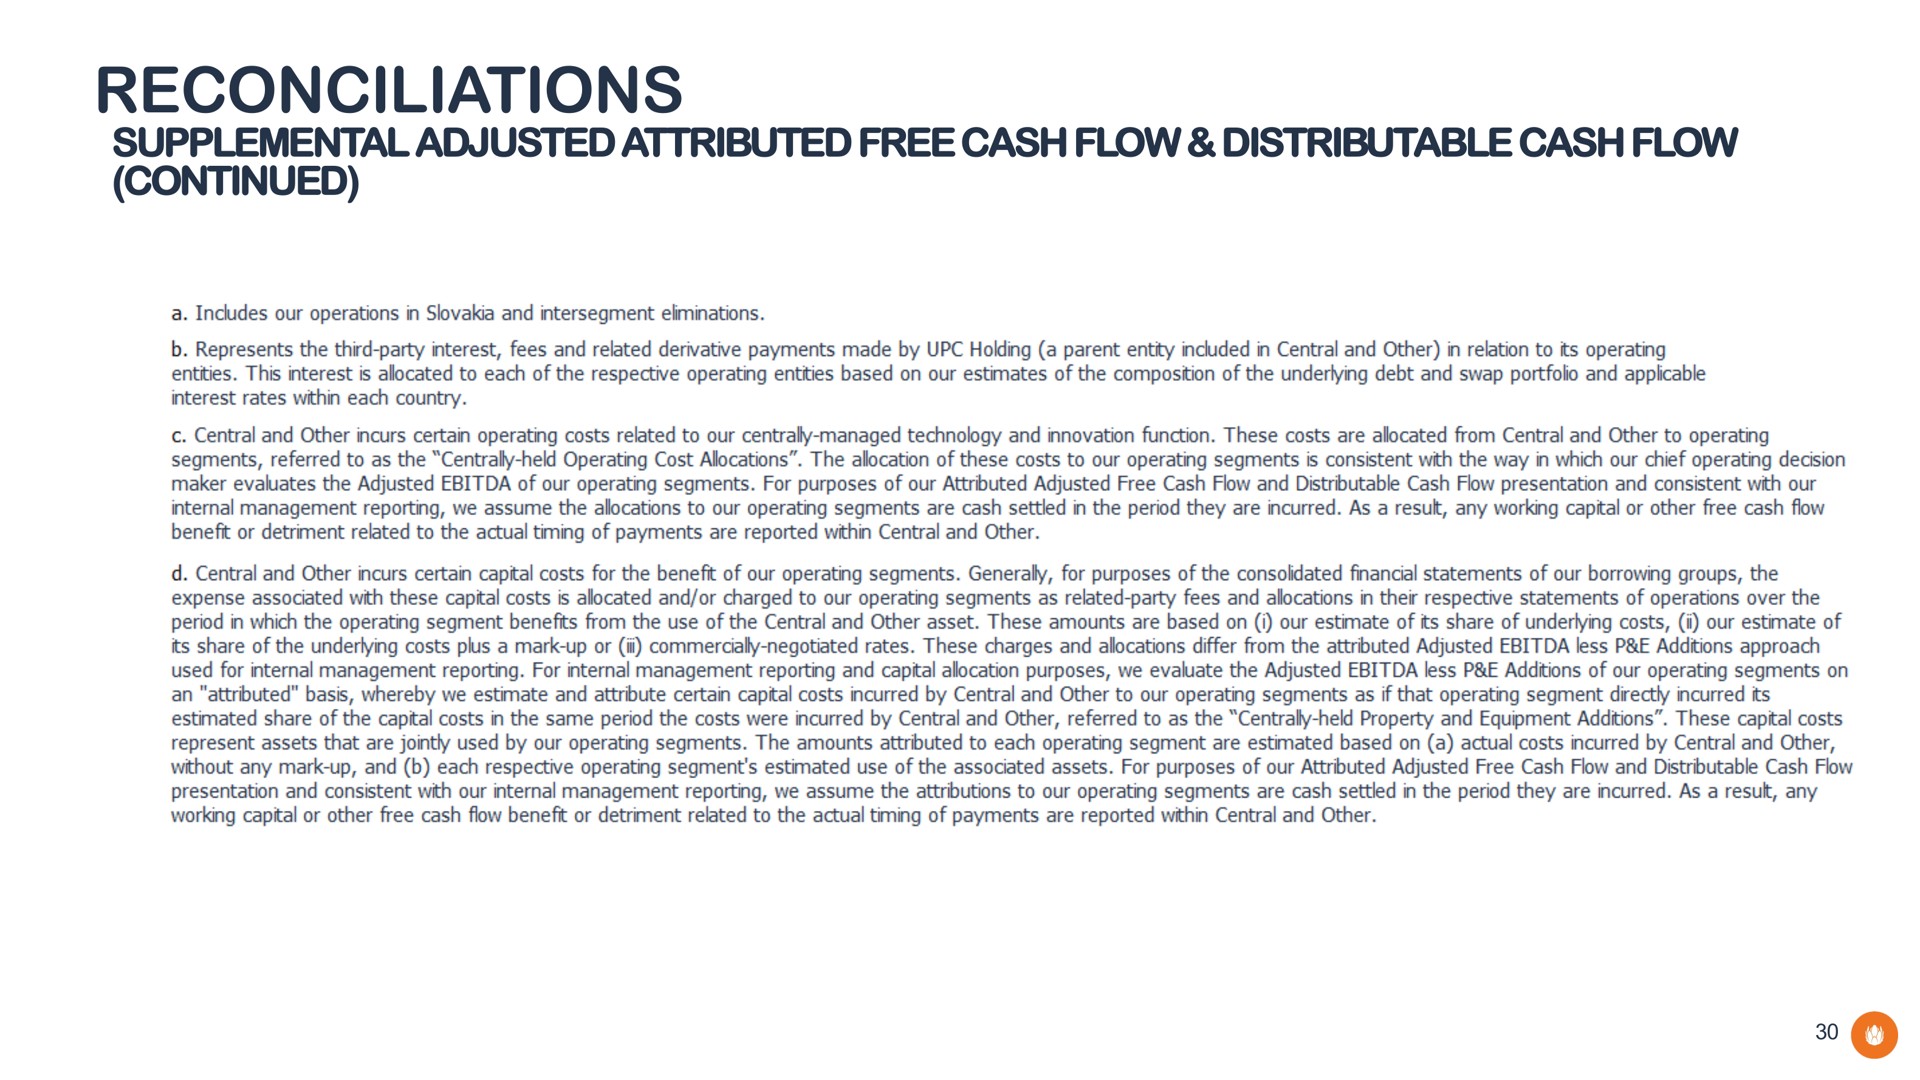 reconciliations supplemental adjusted attributed free cash flow distributable cash flow continued | Liberty Global